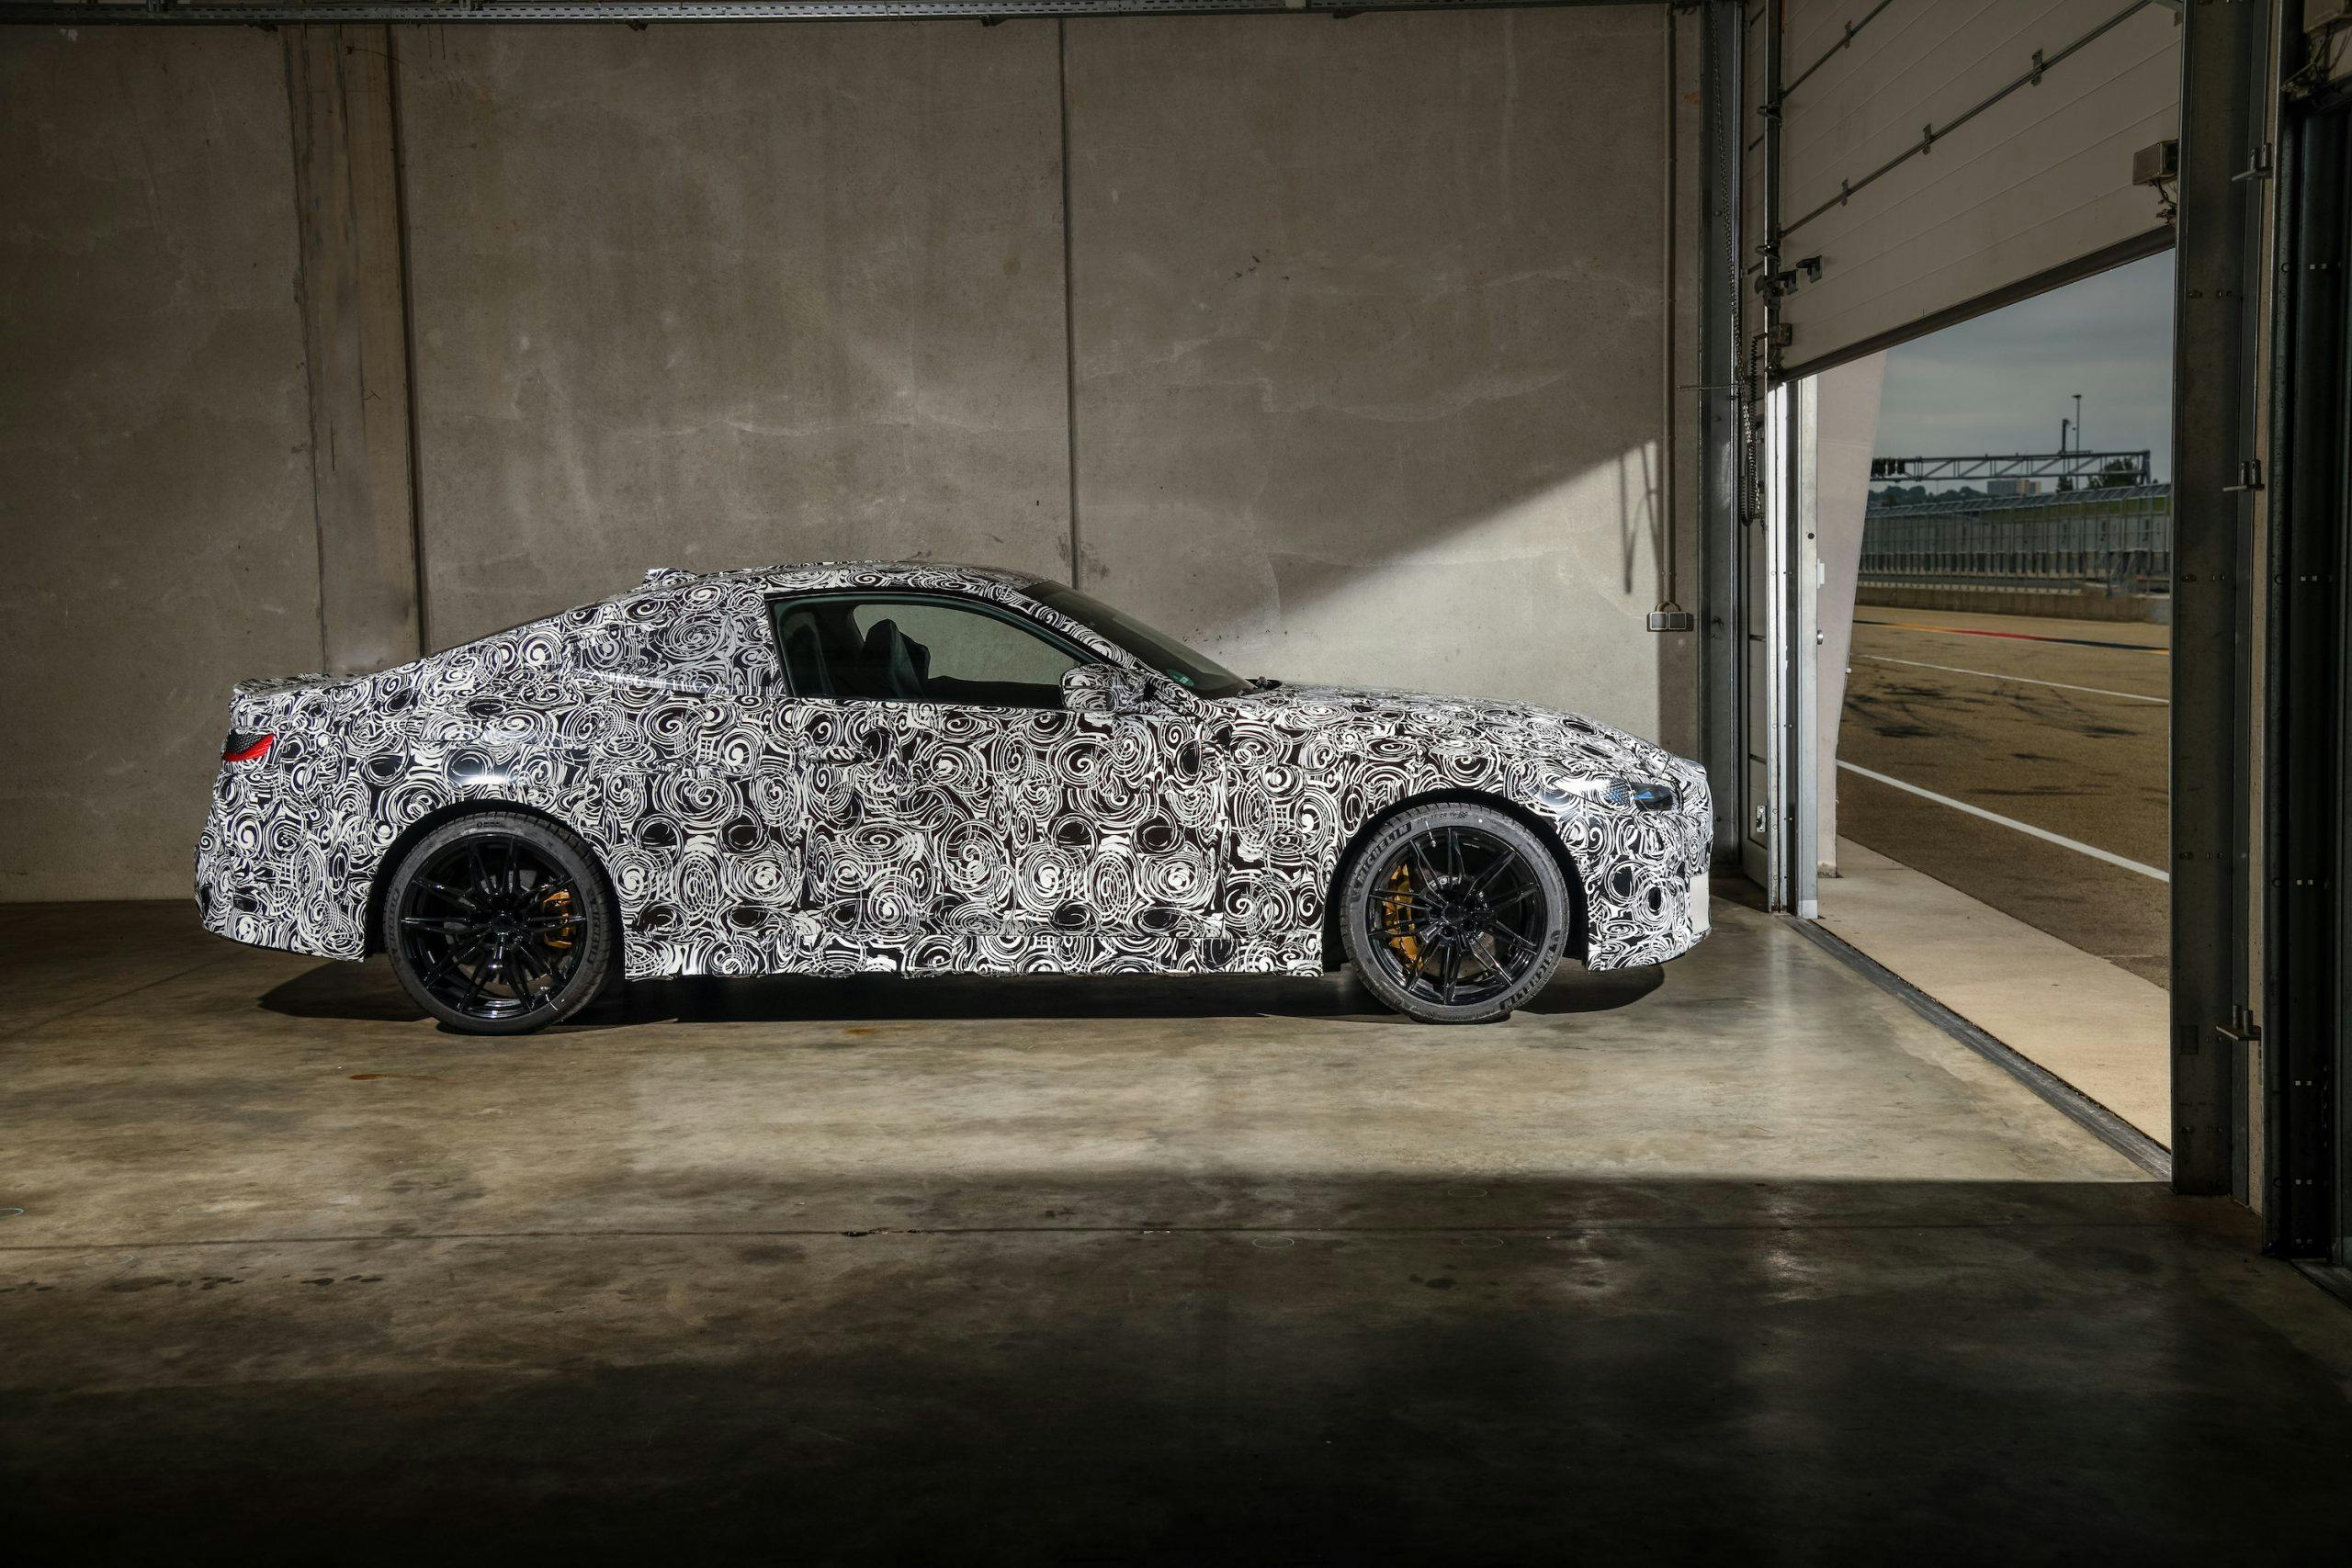 BMW M4 Coupe Side Profile in Garage